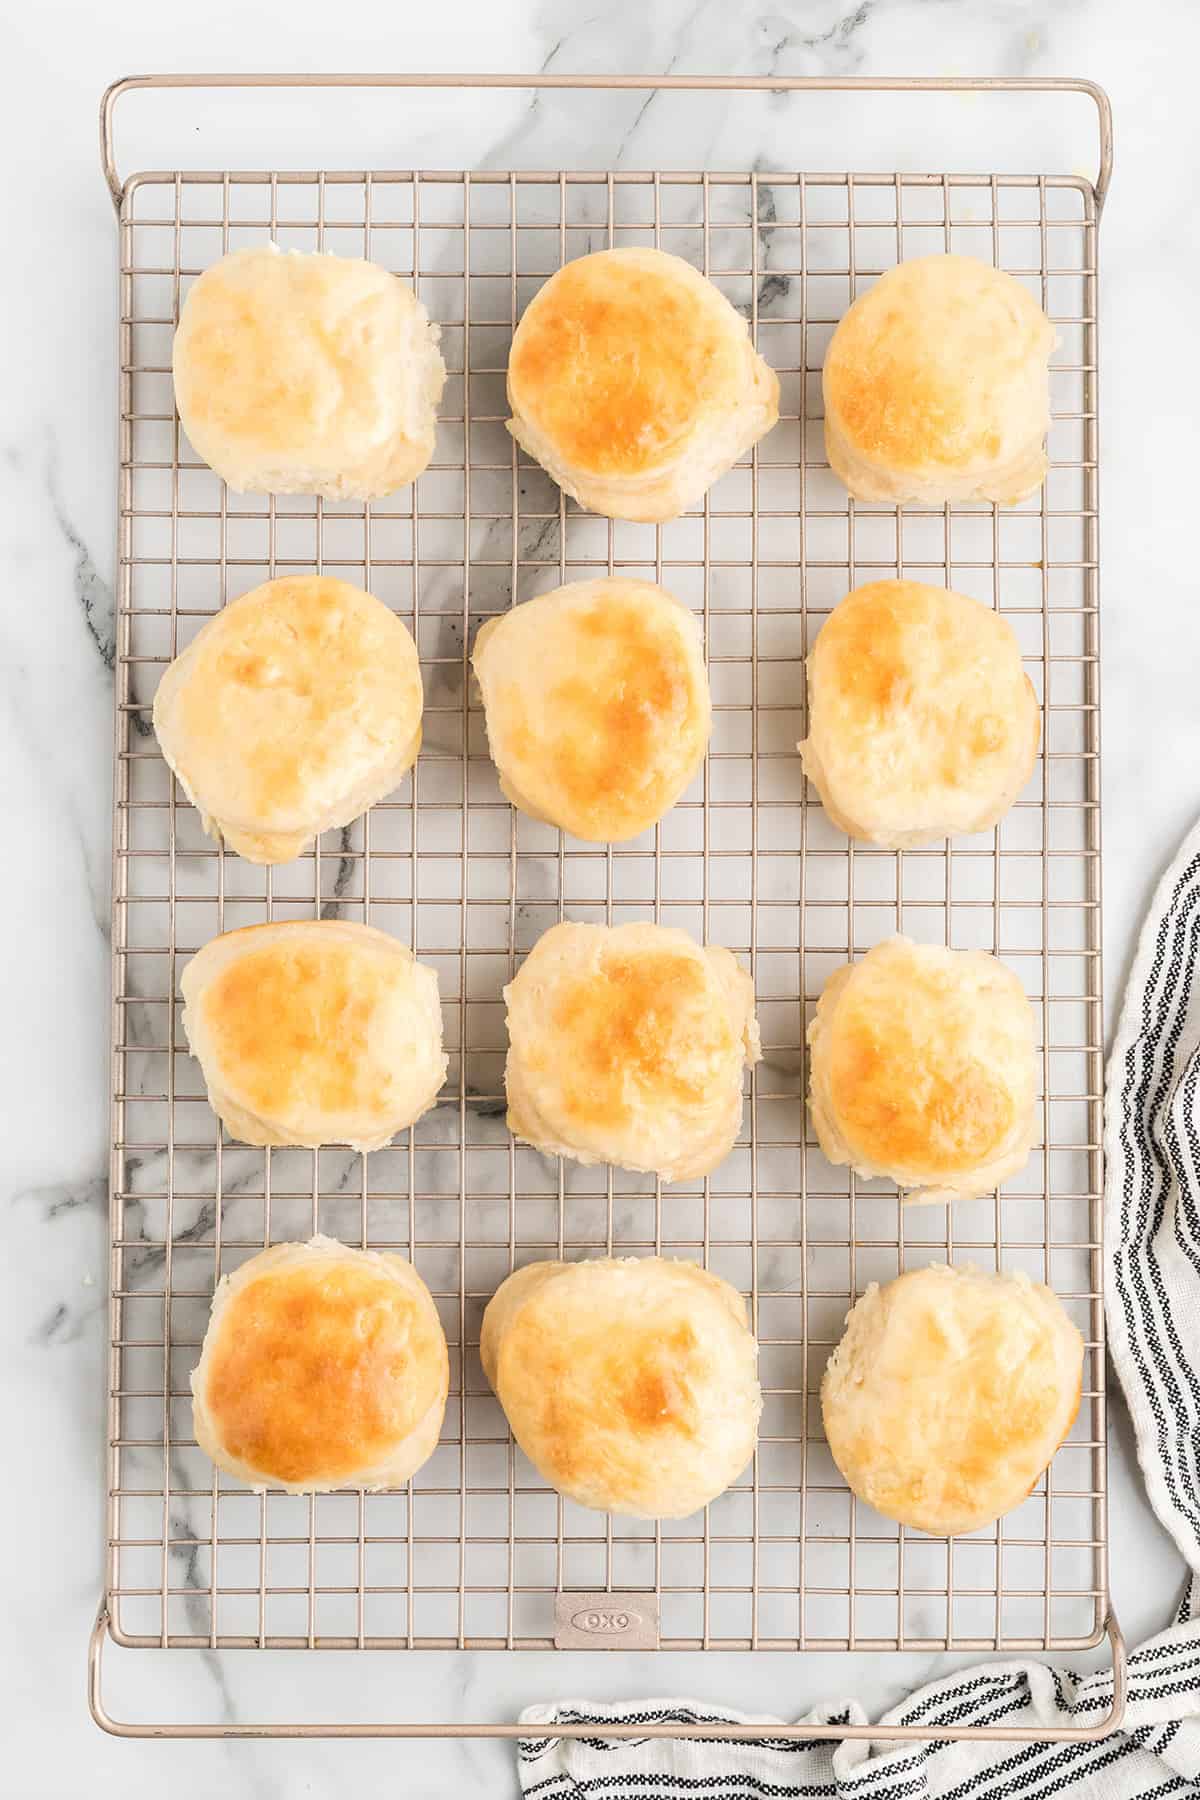 Biscuits cooling on a wire rack.